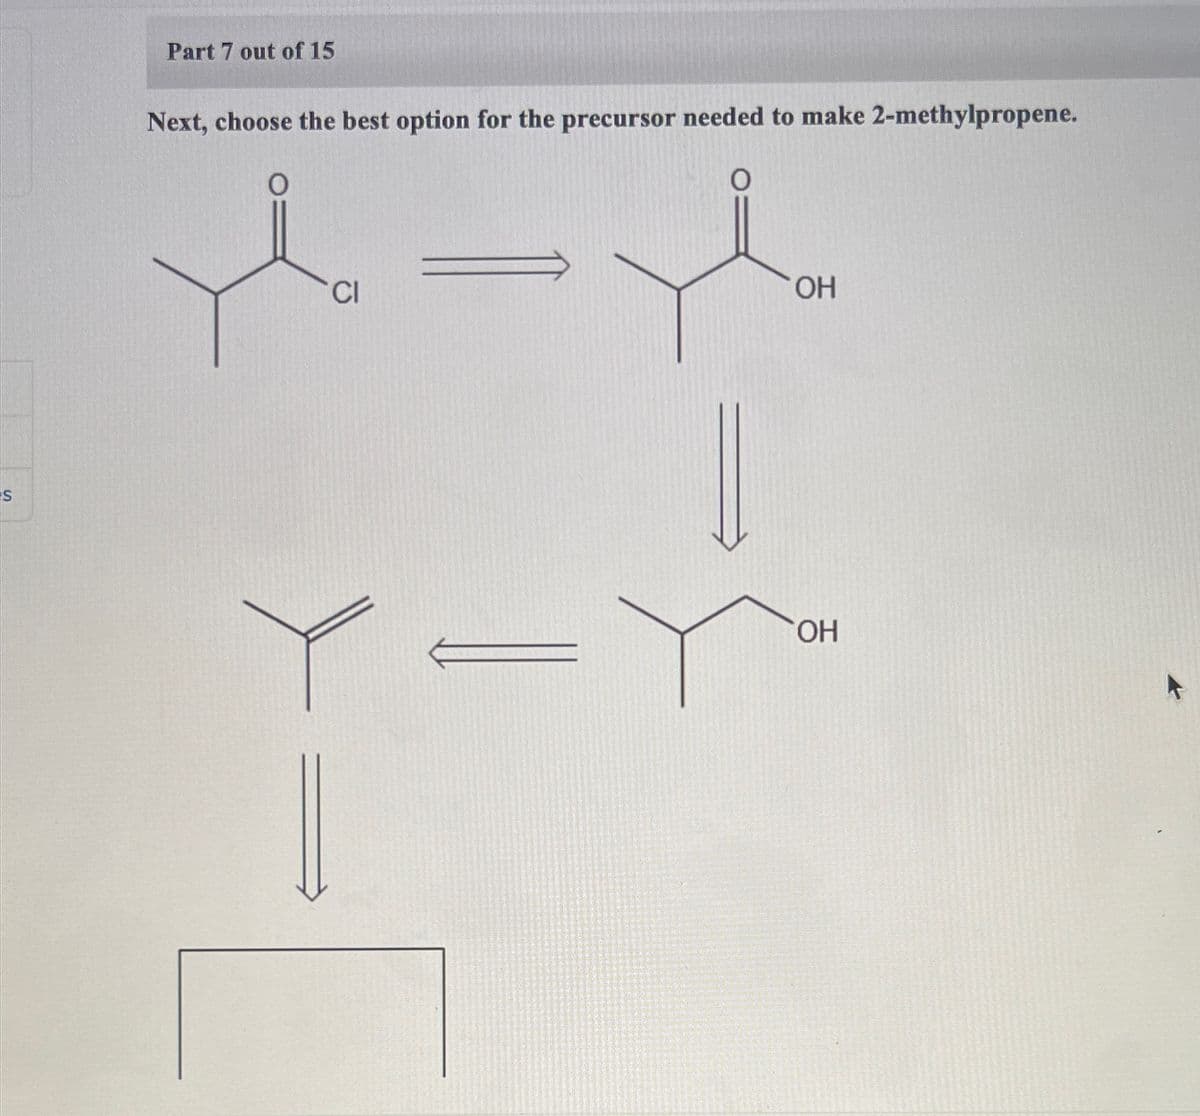 S
Part 7 out of 15
Next, choose the best option for the precursor needed to make 2-methylpropene.
O
CI
OH
OH